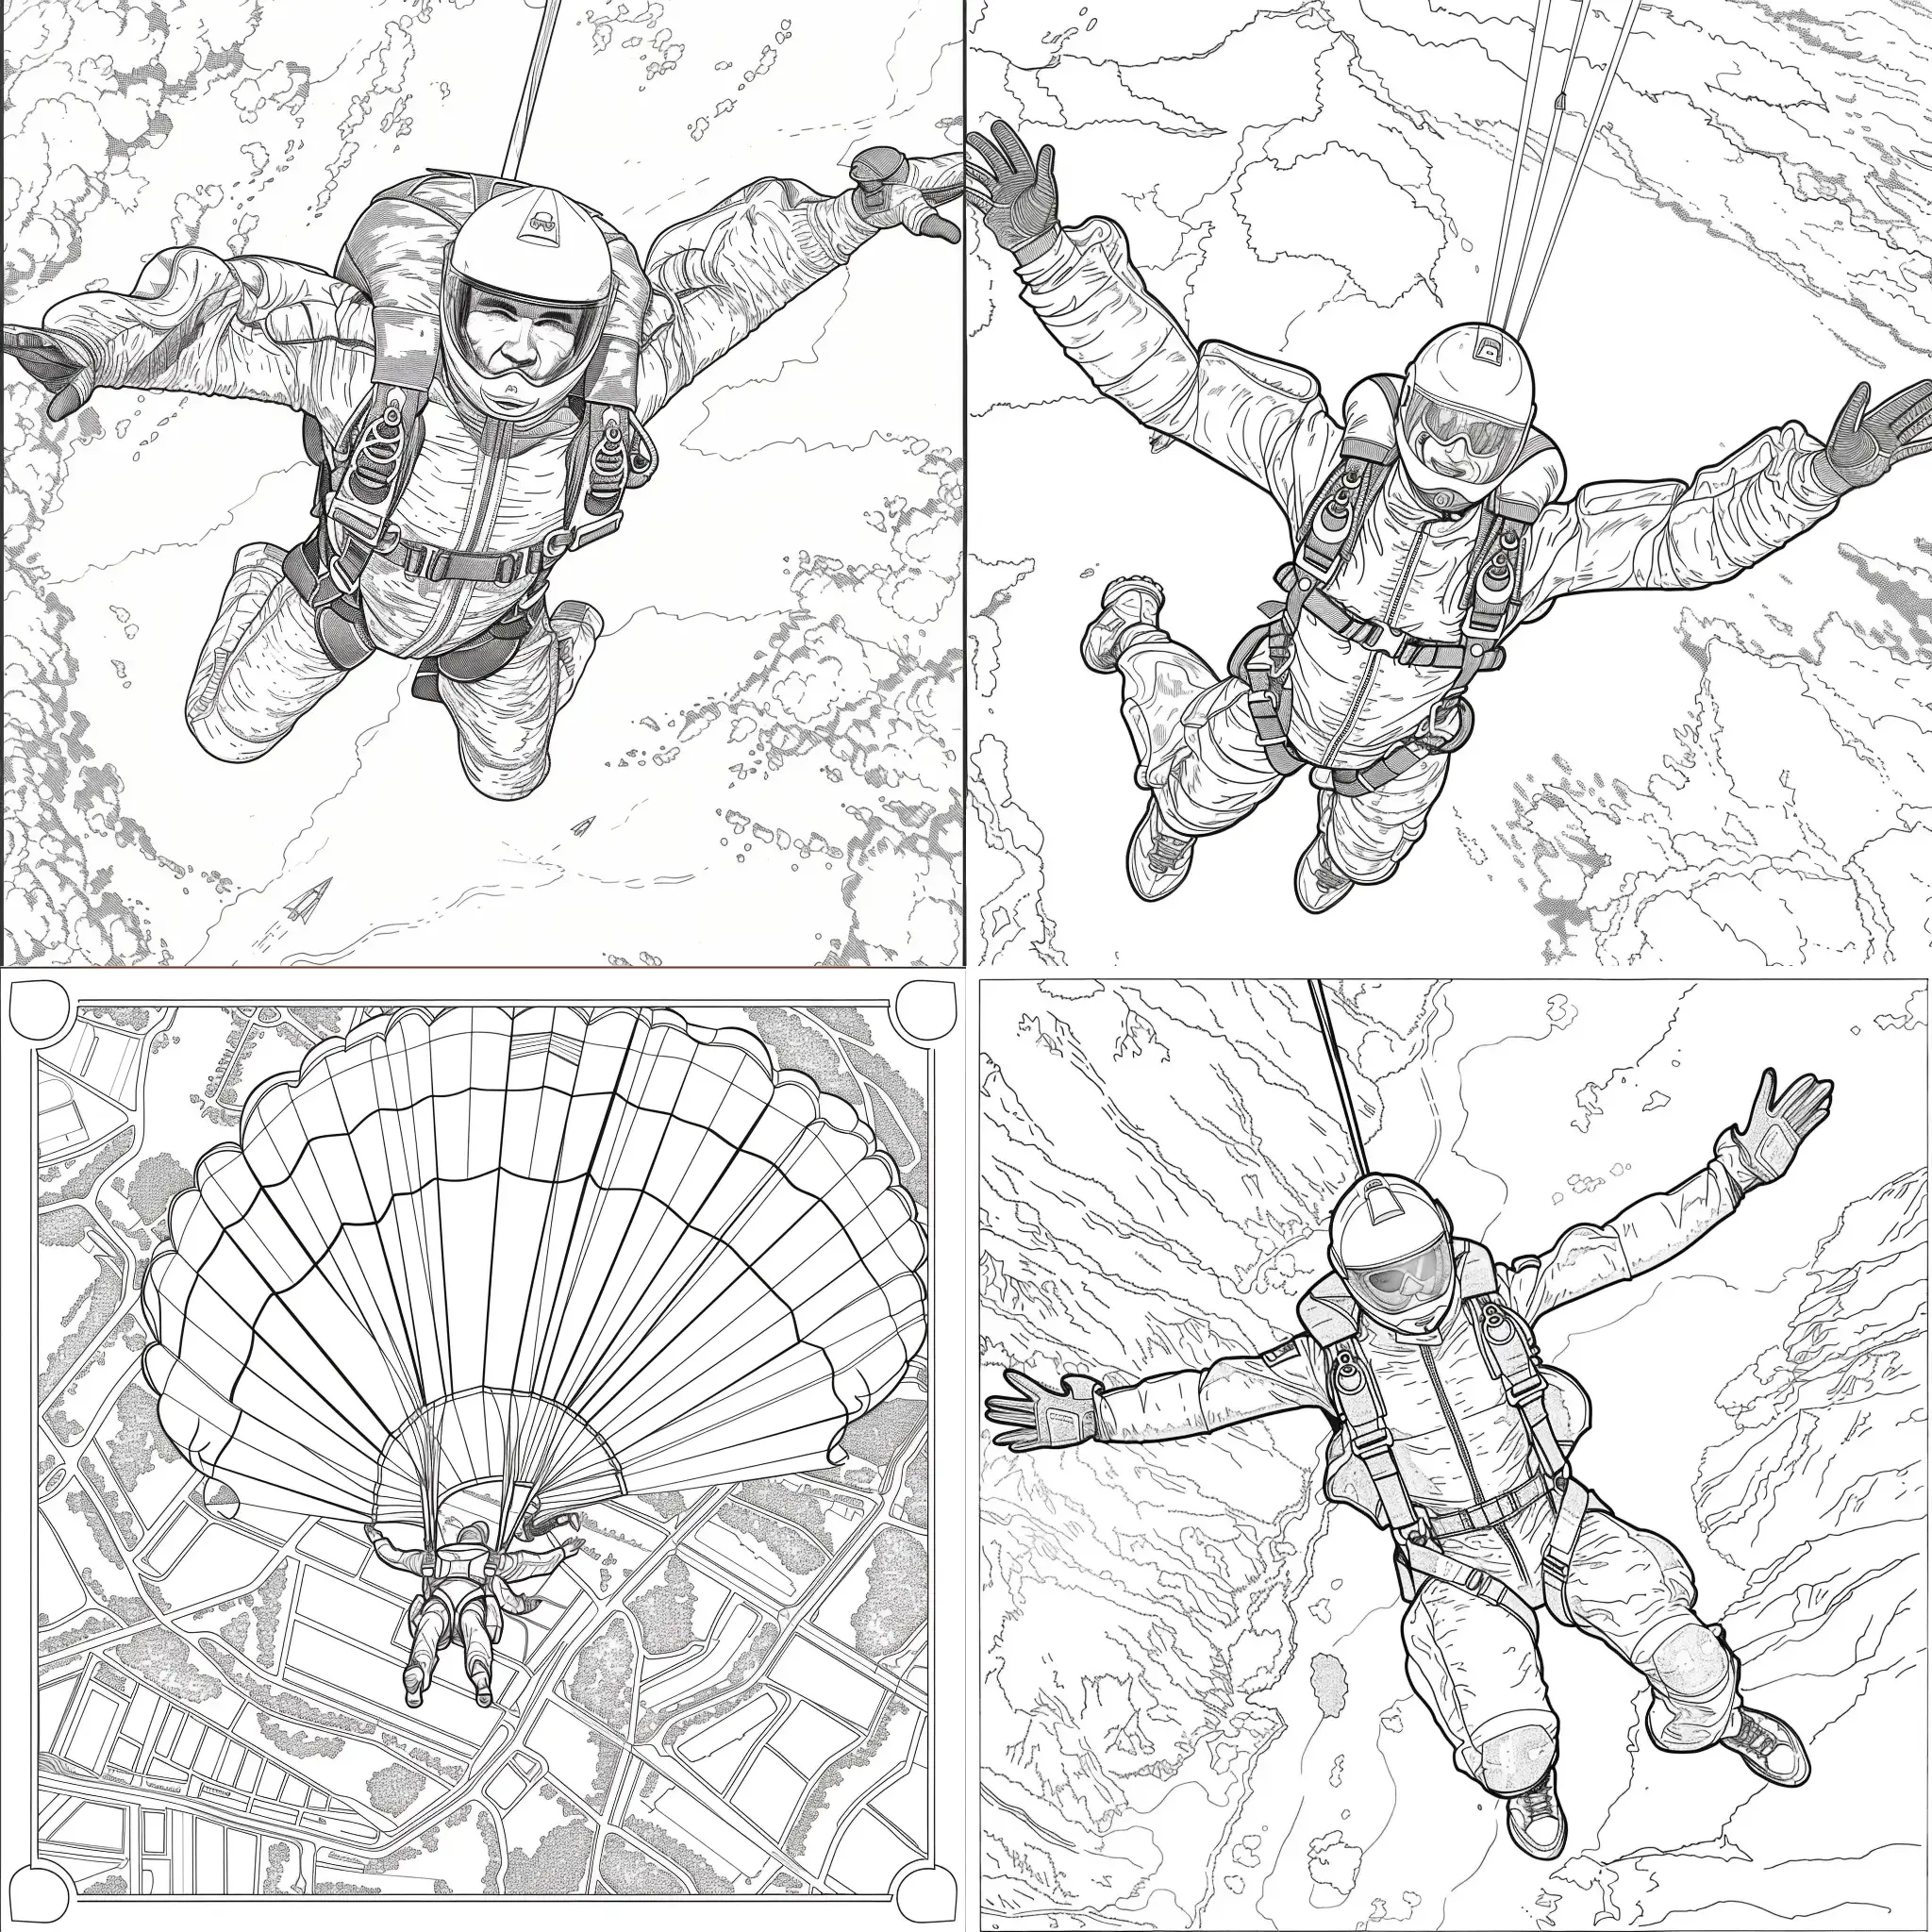 Imagine a coloring book page for 8.5 x 11, no background, no frame, Skydiving